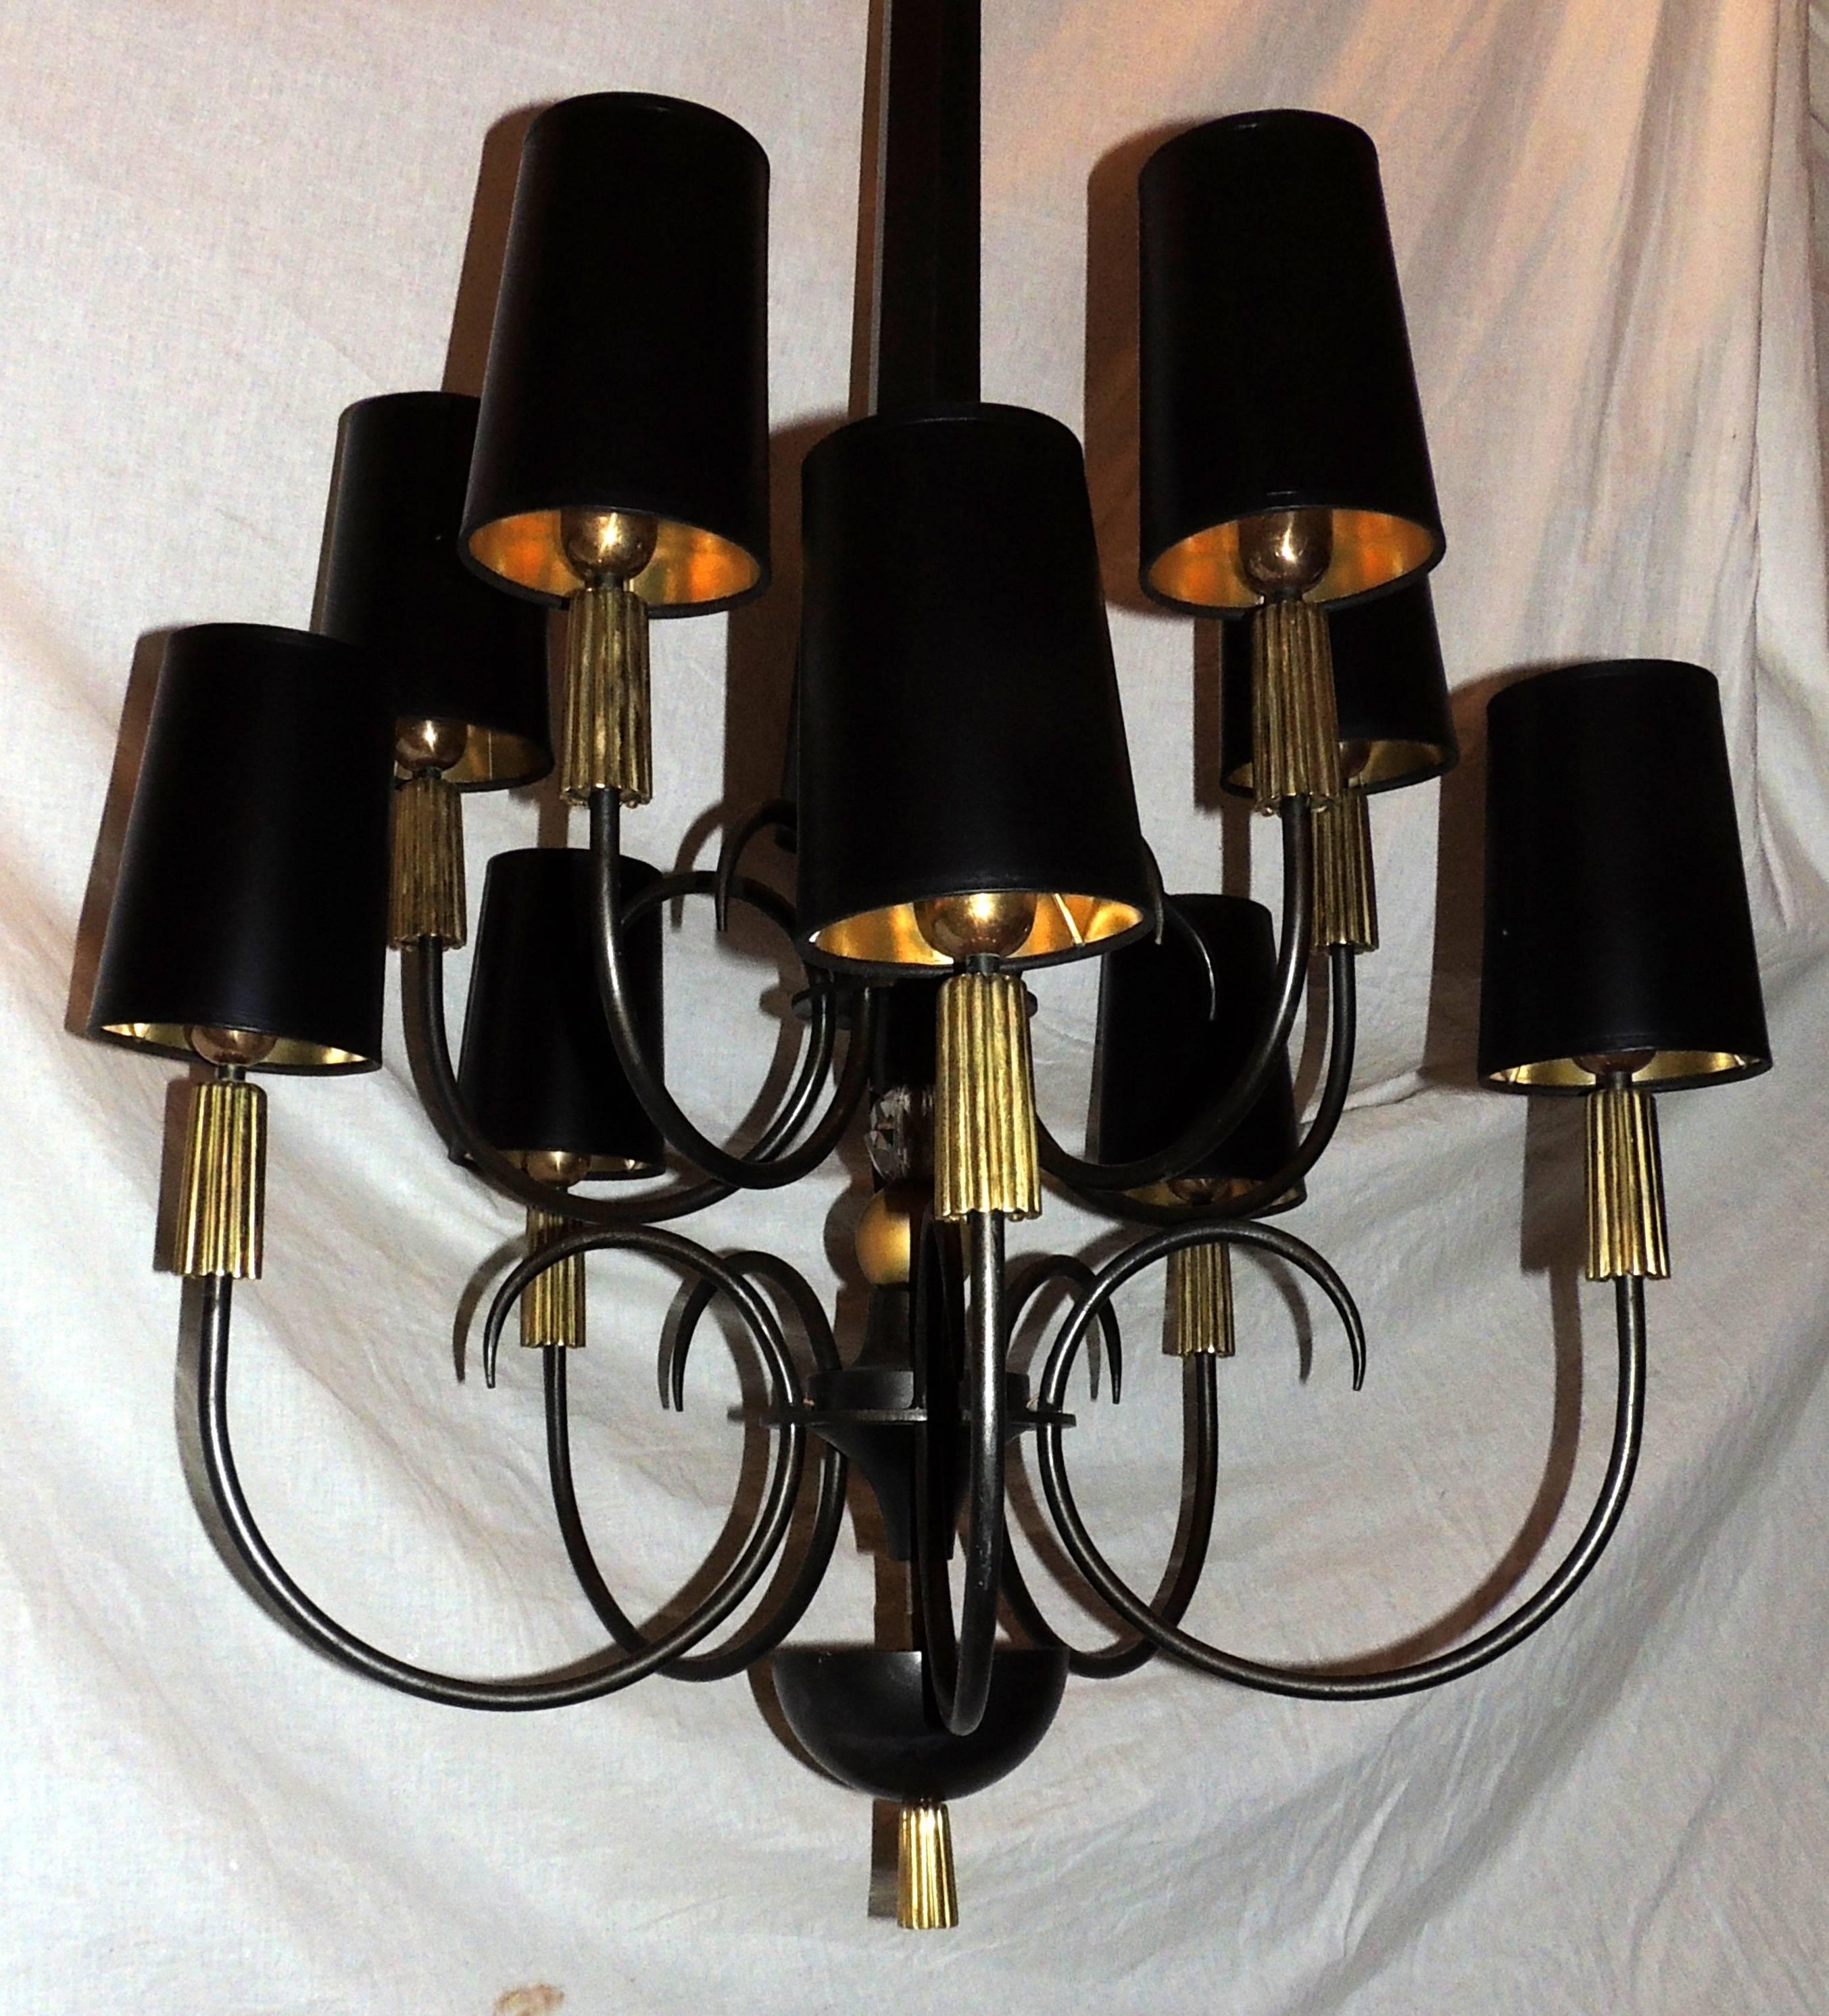 A Wonderful French Empire style patinated and gold gilt regency bronze and iron chandelier with crystal ball center with ten-arm and two interior up lights.
This fixture is so impressive in person with it's eclectic modern flair it could work in